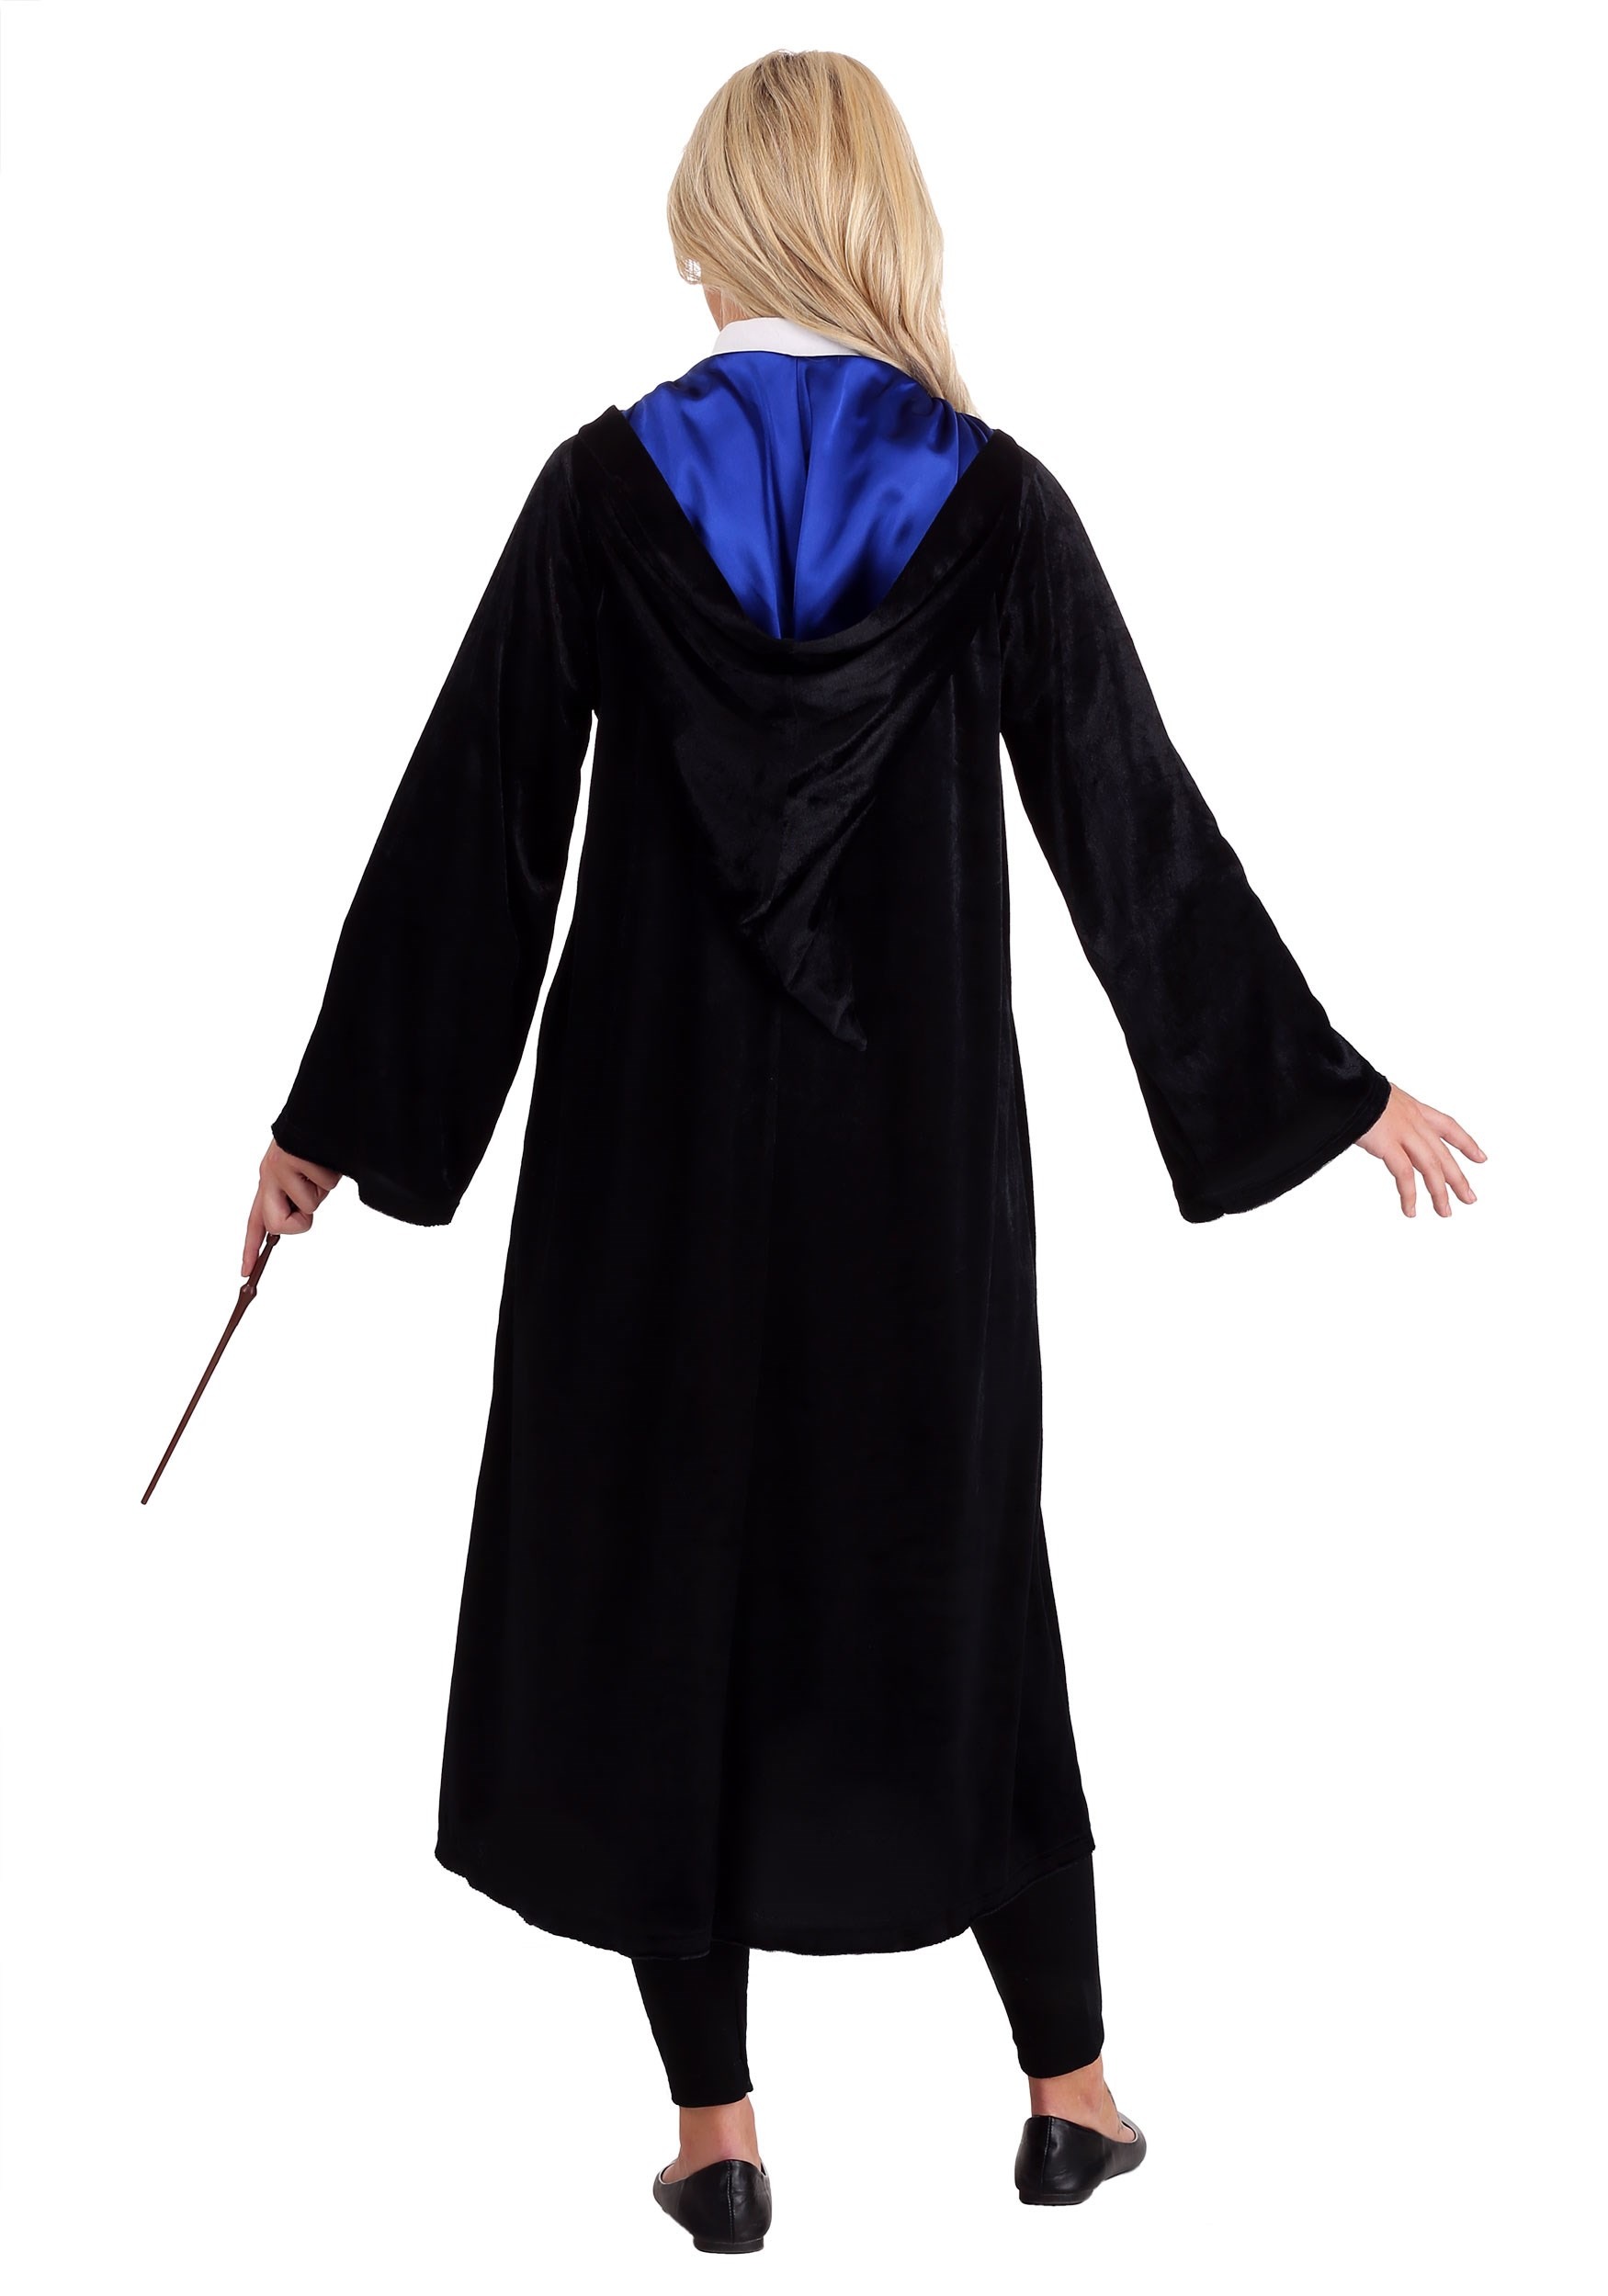 C228 Licensed Harry Potter Adult Deluxe Robe Costume 